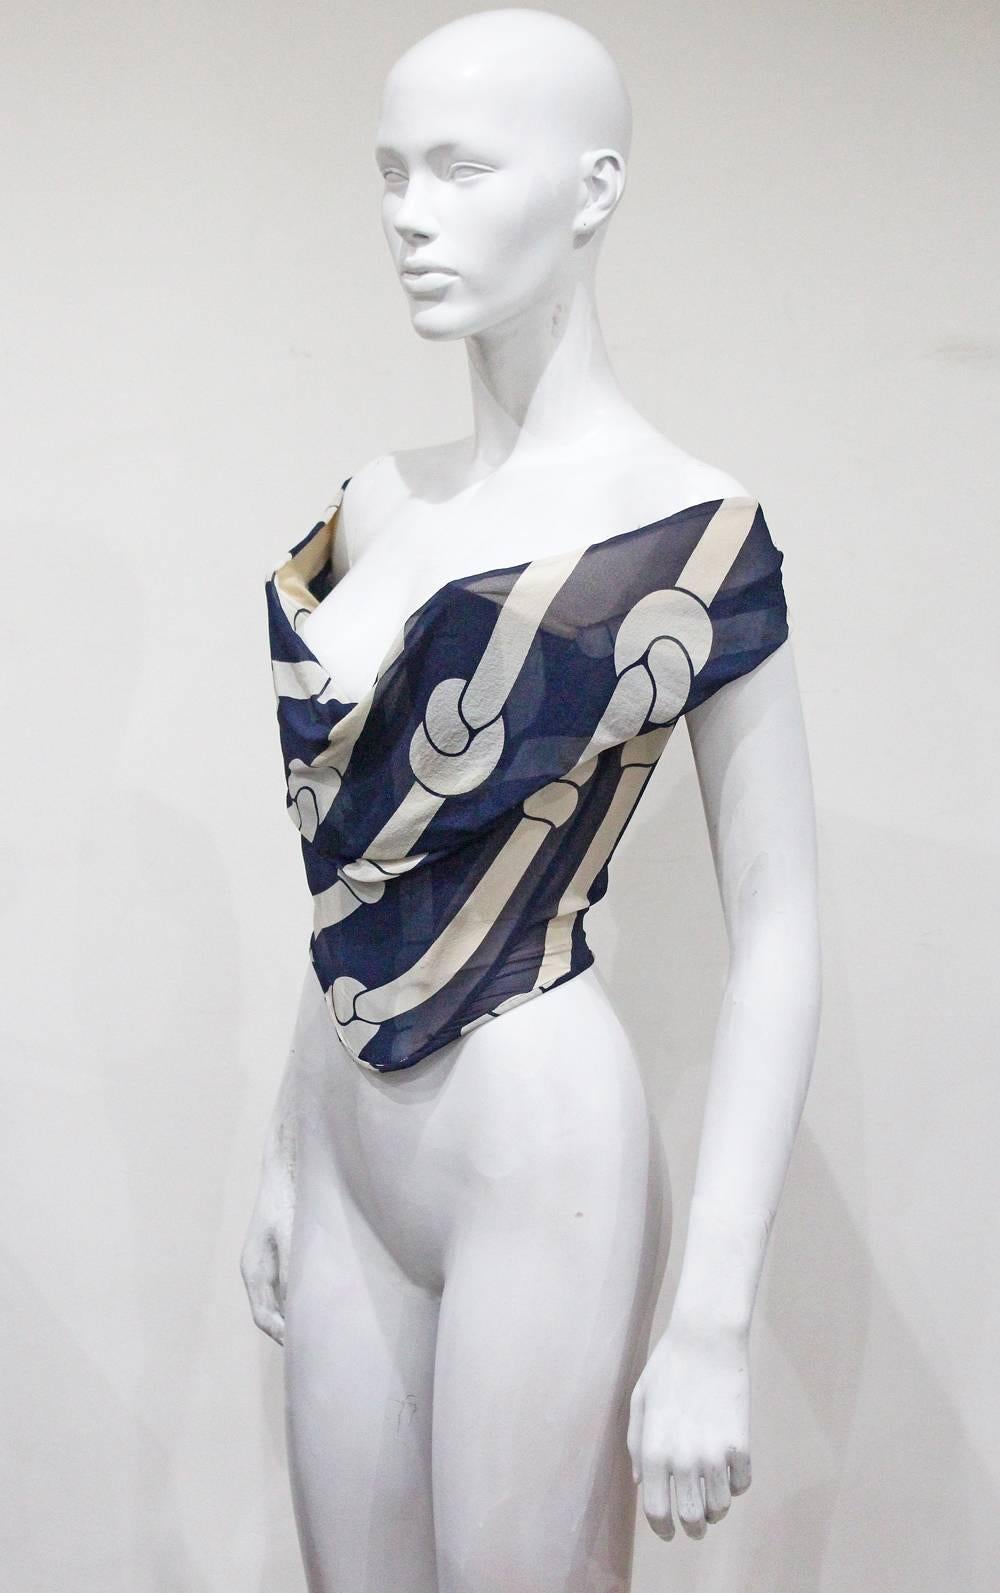 A Vivienne Westwood runway silk chiffon corset from the Spring/Summer 1998 collection. The corset is boned inside and features a nautical rope inspired navy print and off the shoulder cut.

Small